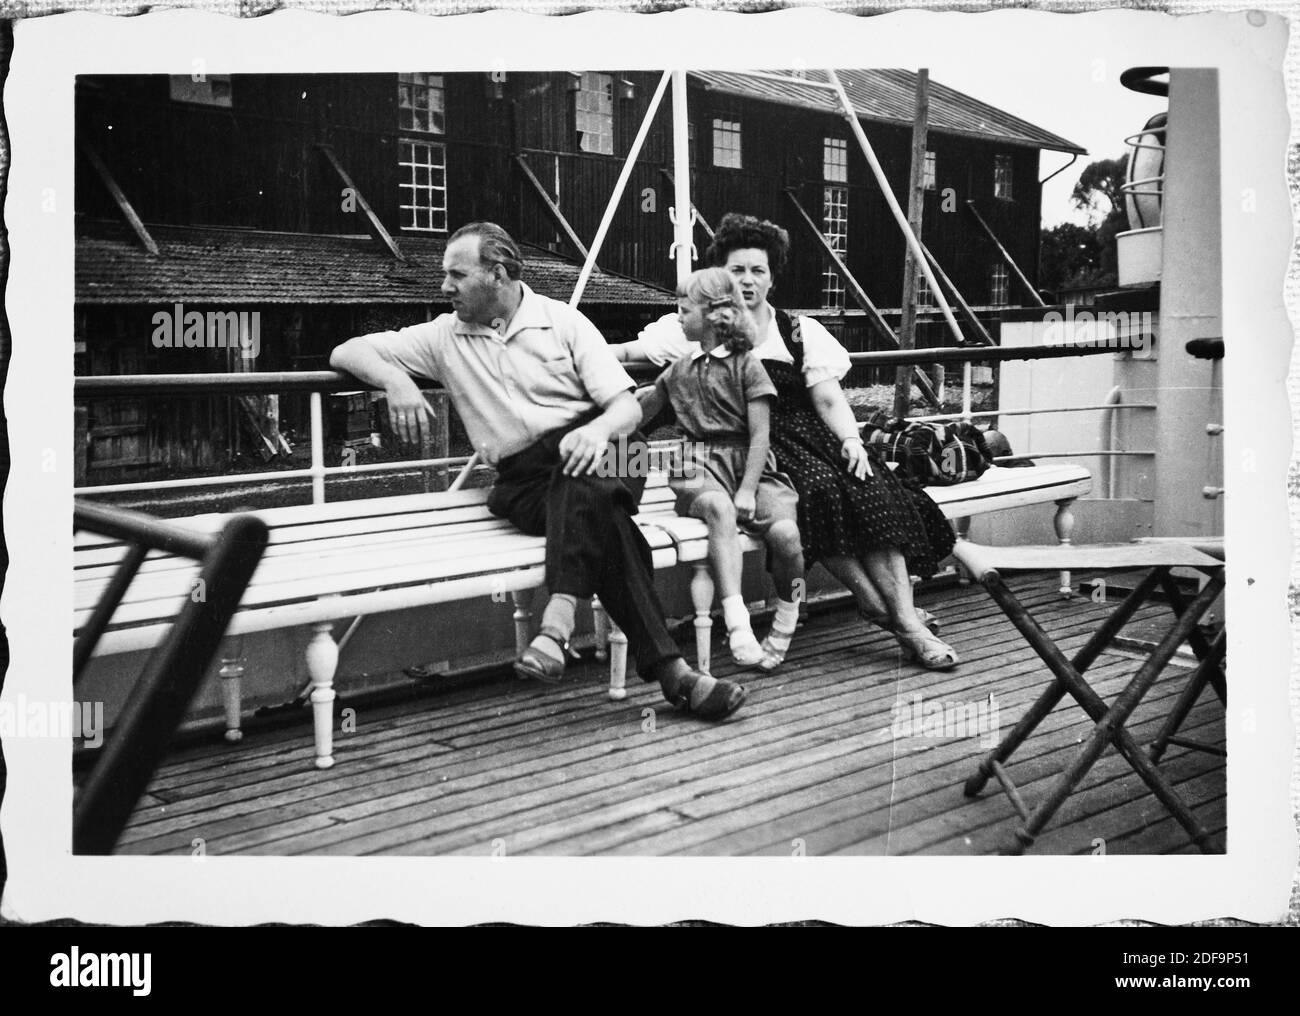 Historical Photo:  Lindau, Bodensee 1966: A couple with child at a boat trip Reproduction in Marktoberdorf, Germany, October 26, 2020.  © Peter Schatz / Alamy Stock Photos Stock Photo